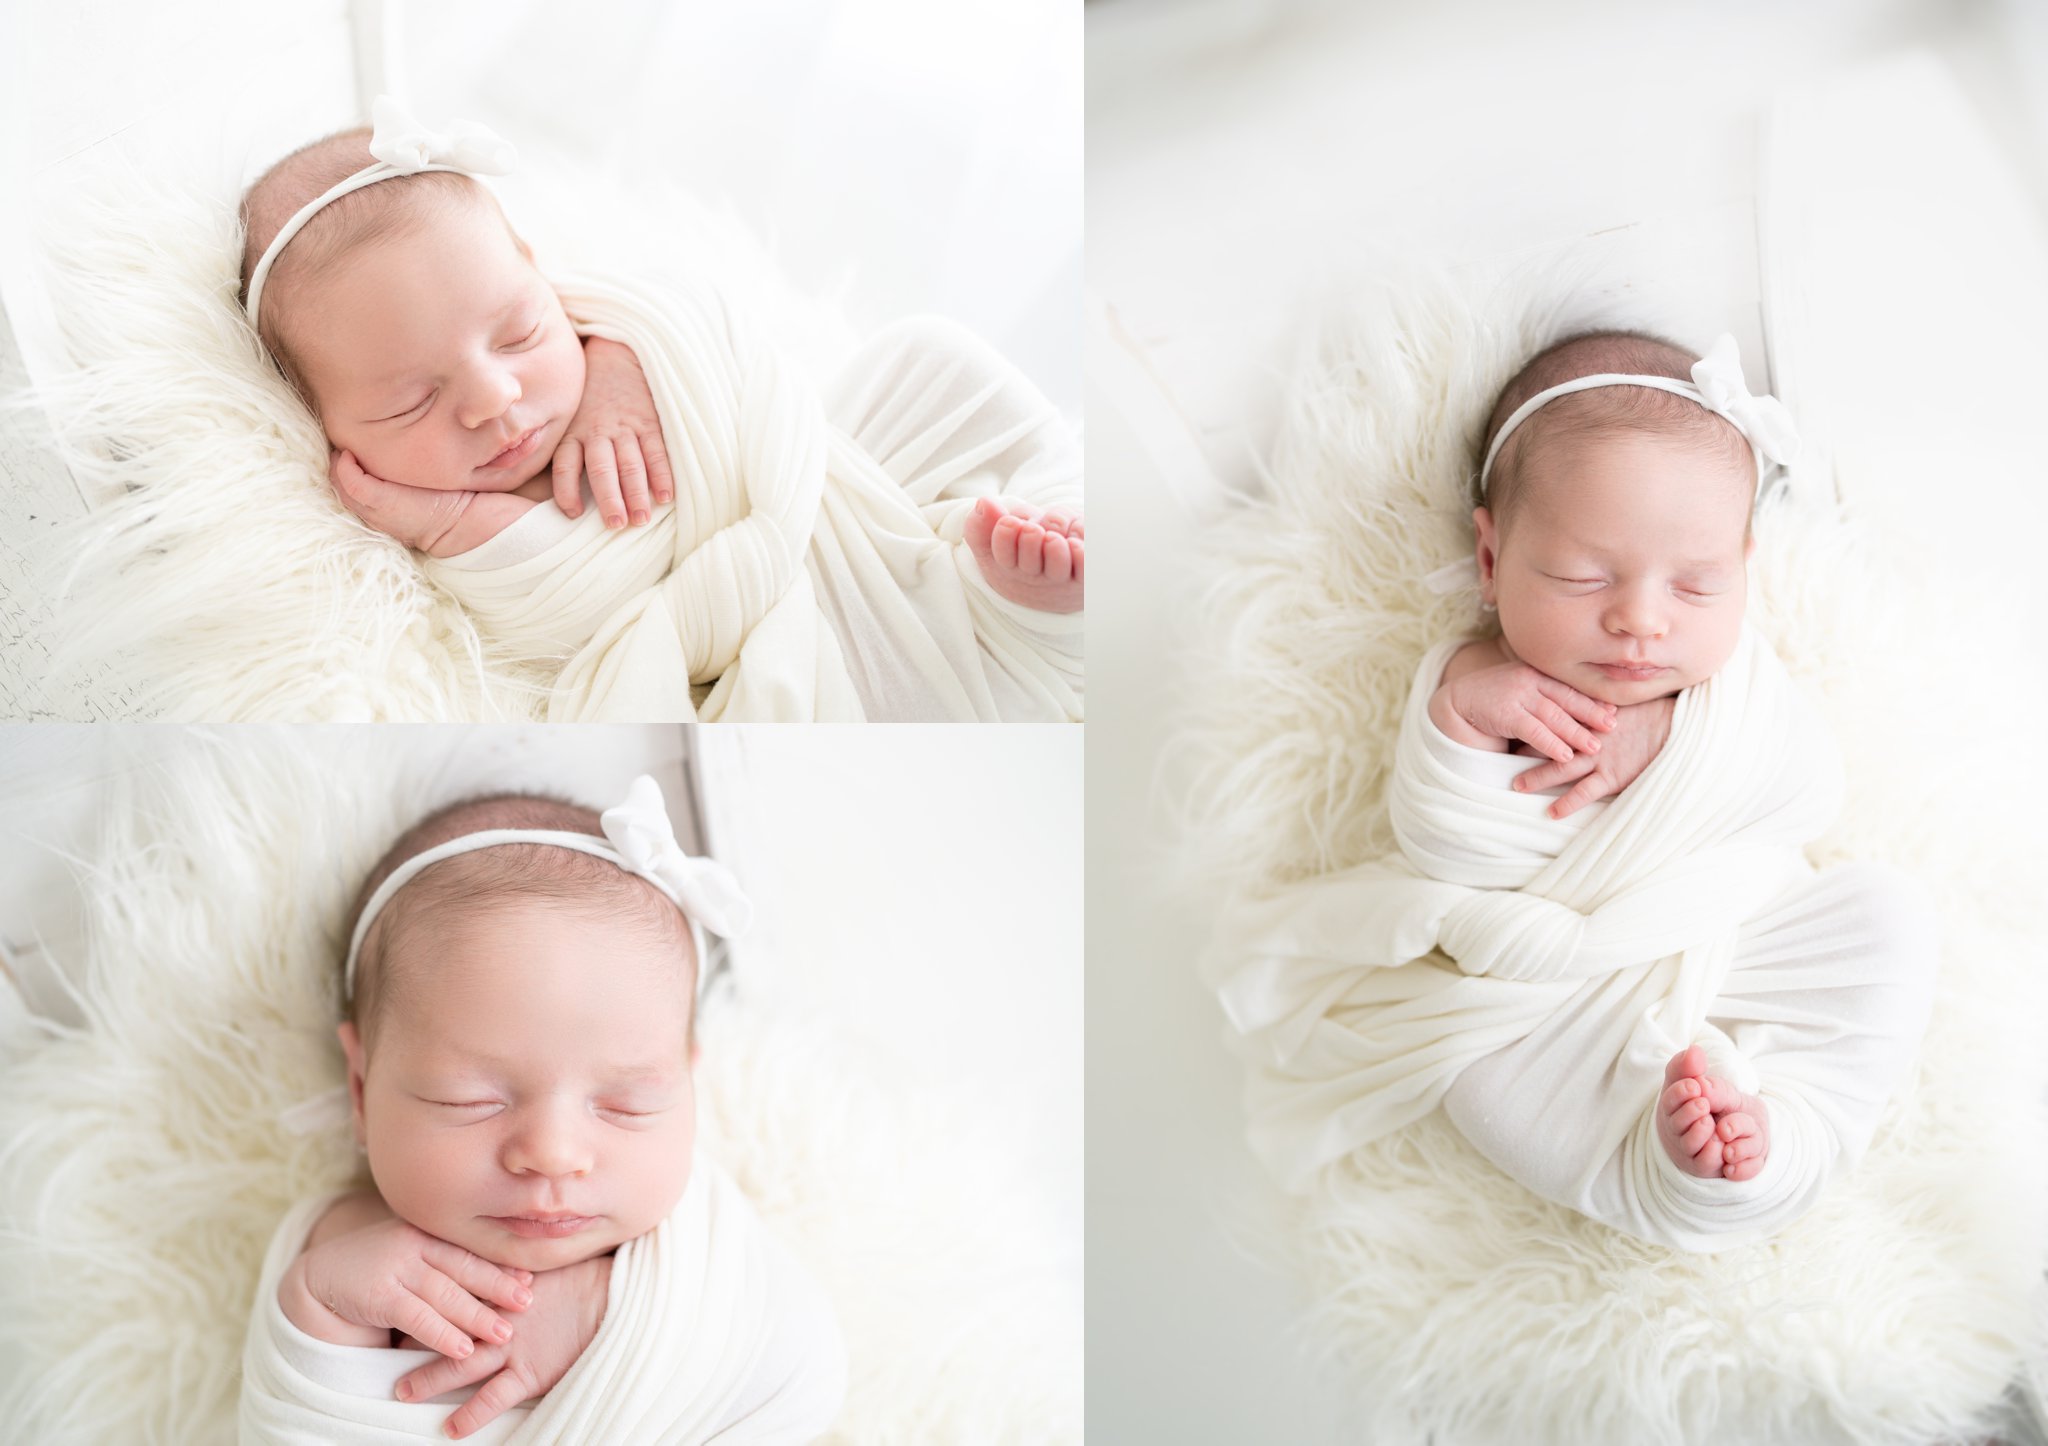 Newborn Photo Shoot featuring 2 week old baby girl wrapped in a white wrap laying in a moon prop